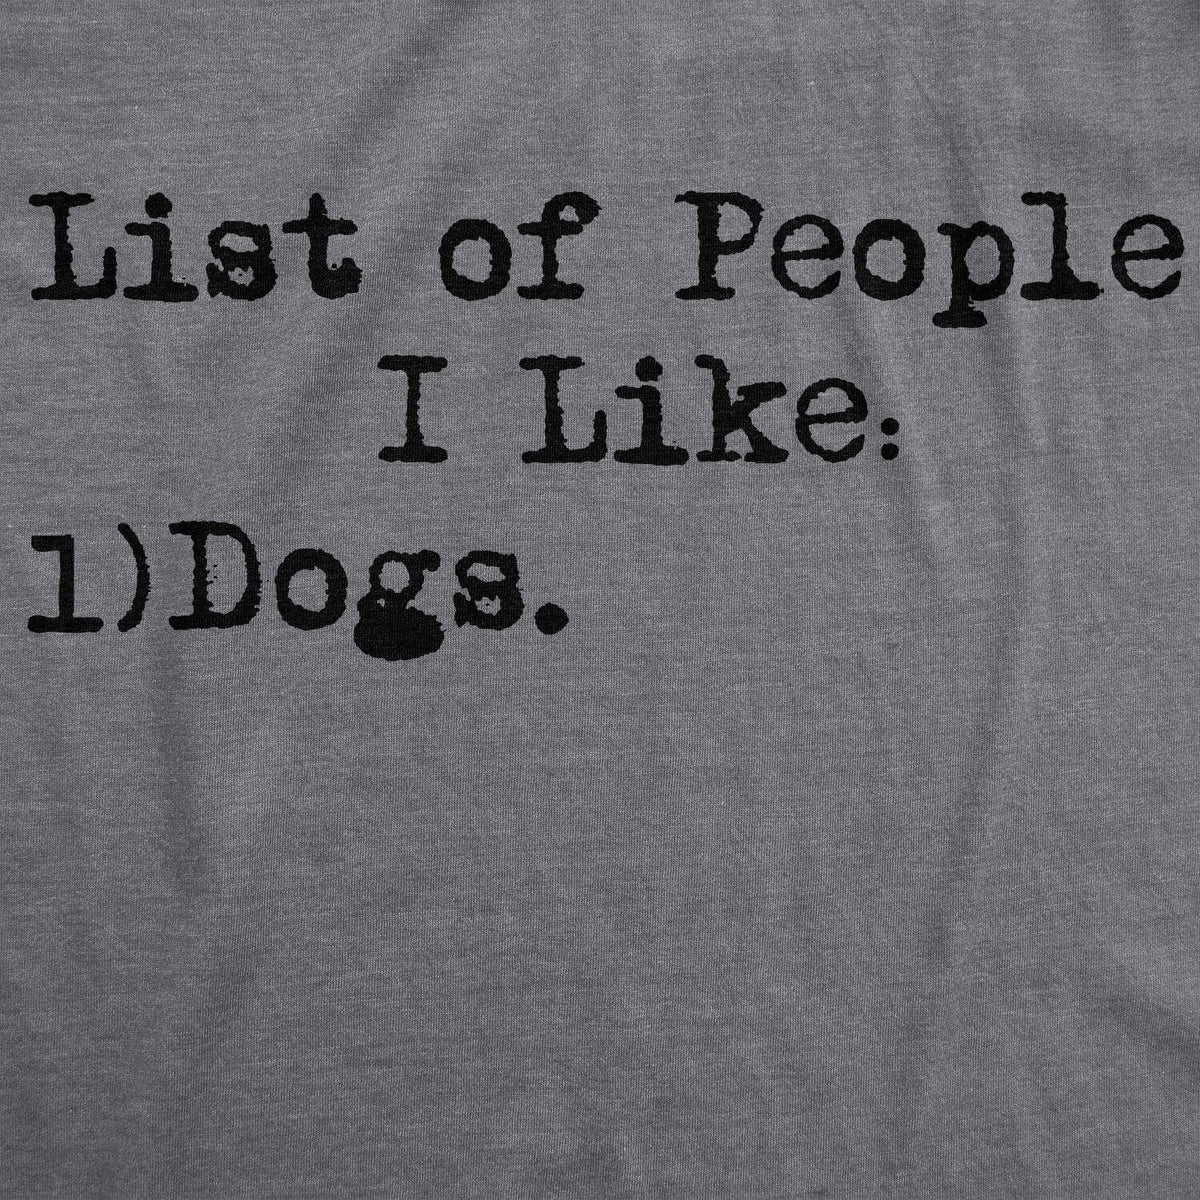 List Of People I Like: Dogs Men&#39;s Tshirt  -  Crazy Dog T-Shirts